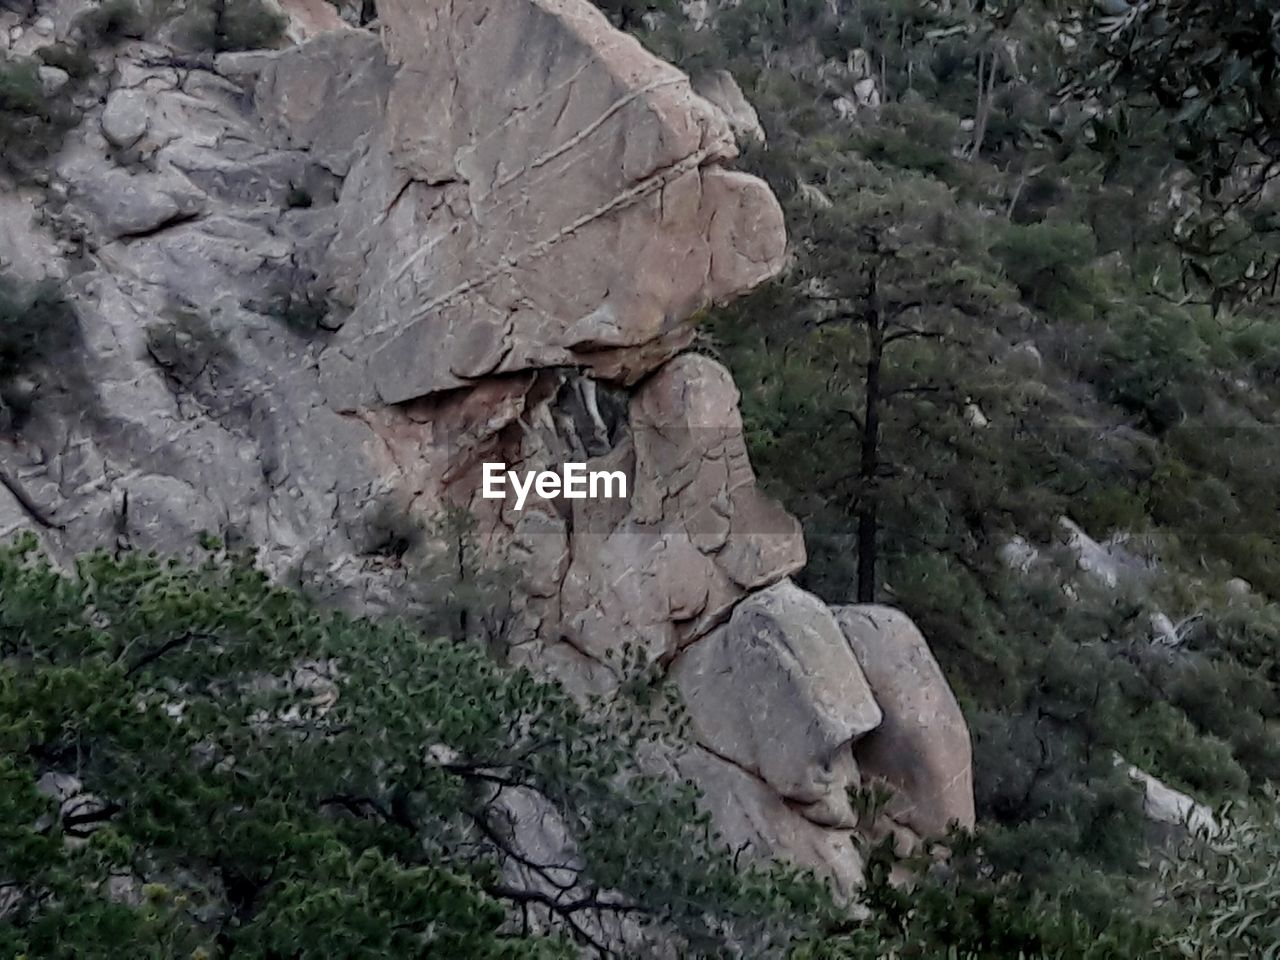 SCENIC VIEW OF ROCK FORMATIONS IN FOREST